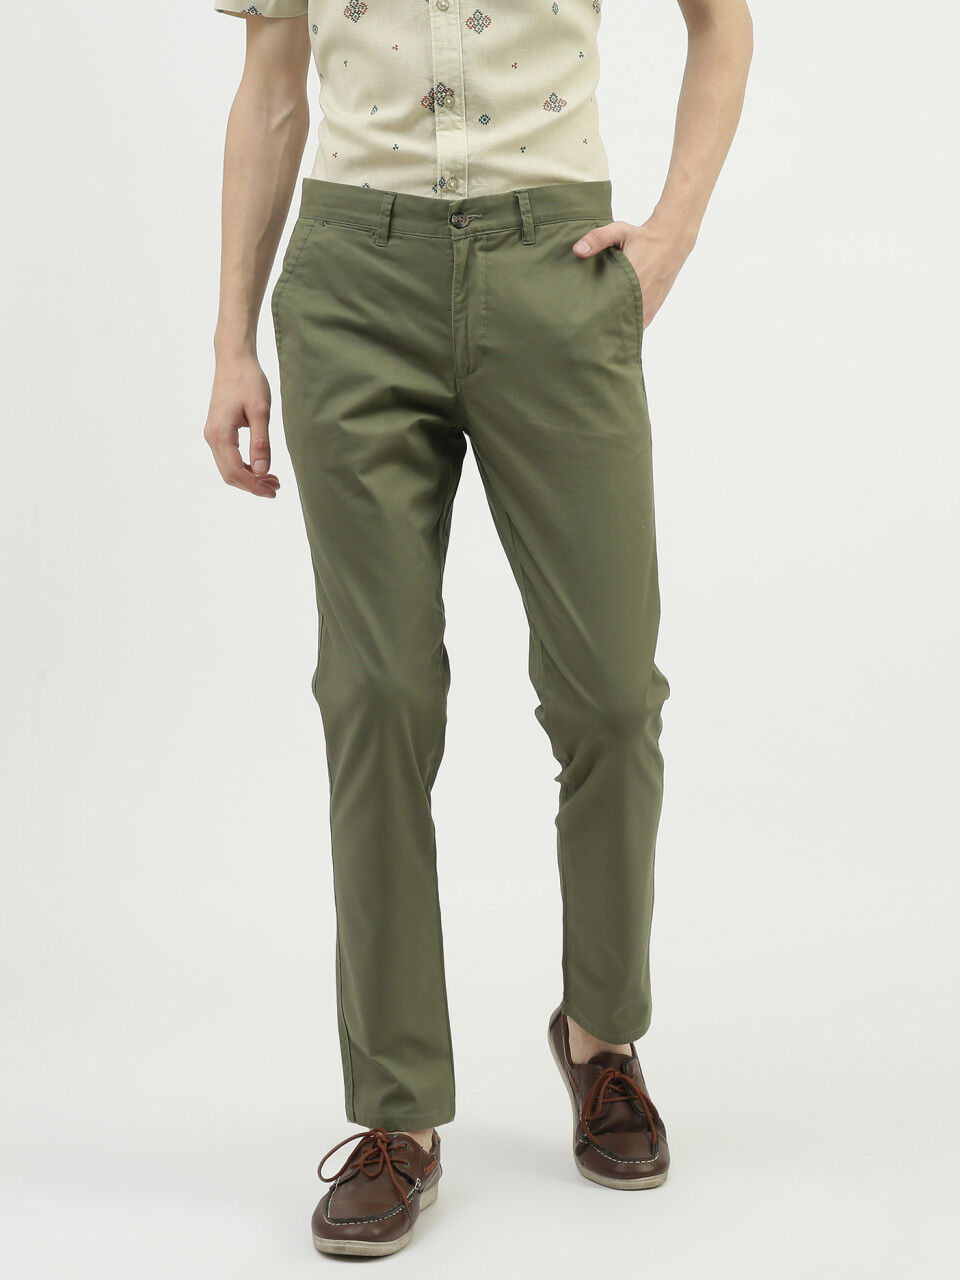 Buy Beige Trousers  Pants for Men by UNITED COLORS OF BENETTON Online   Ajiocom